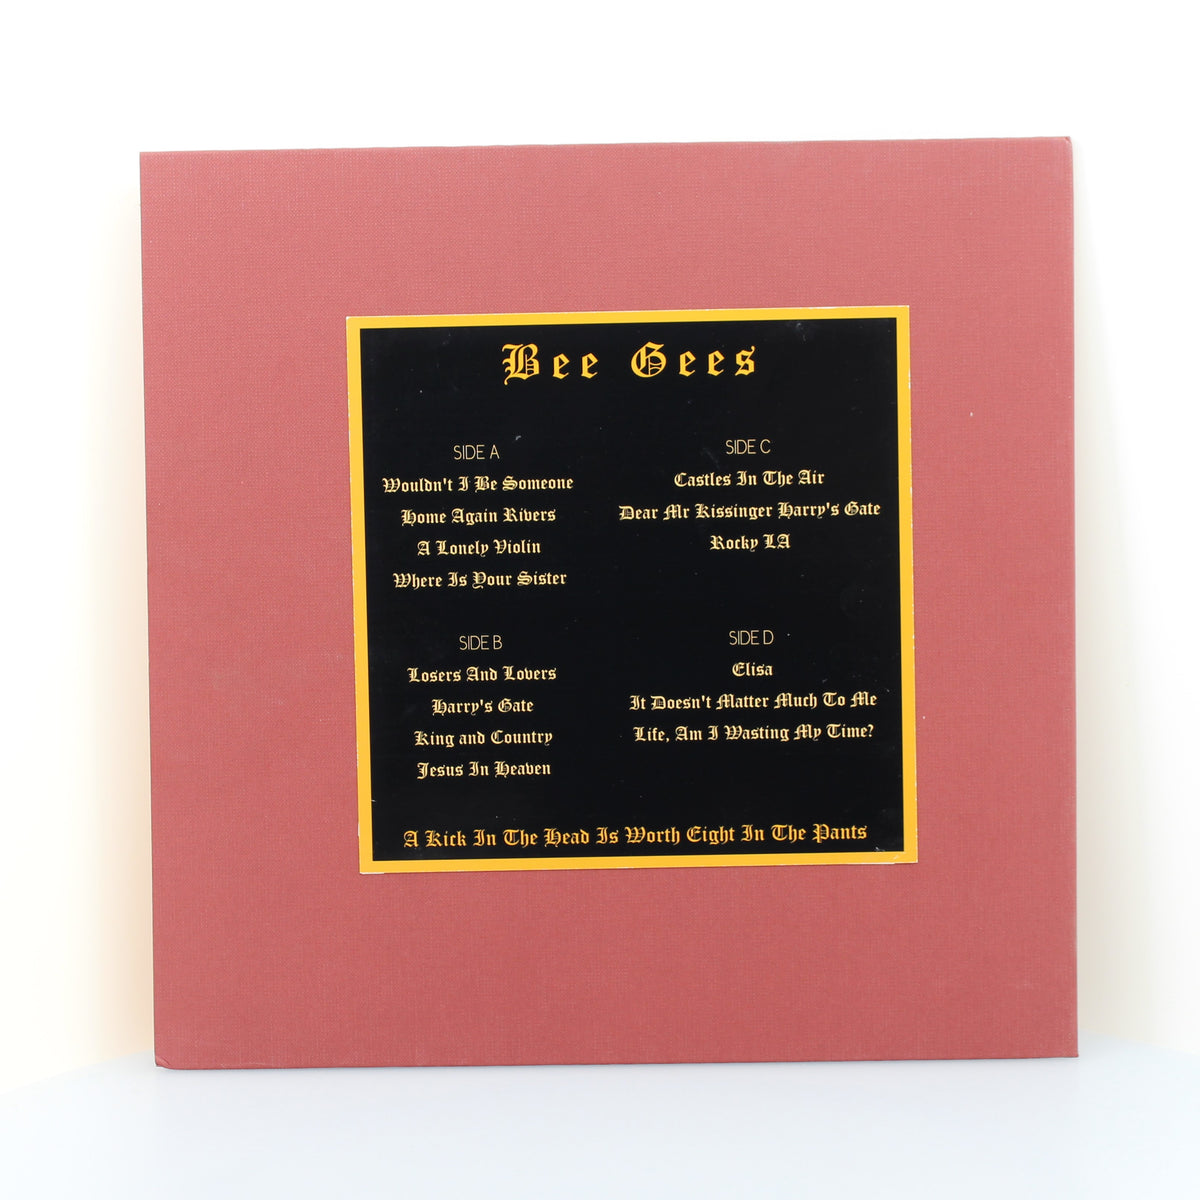 Bee Gees - A Kick In The Head Is Worth Eight In The Pants, 2x Vinyl LP 33Rpm Test Pressing, Malaysia